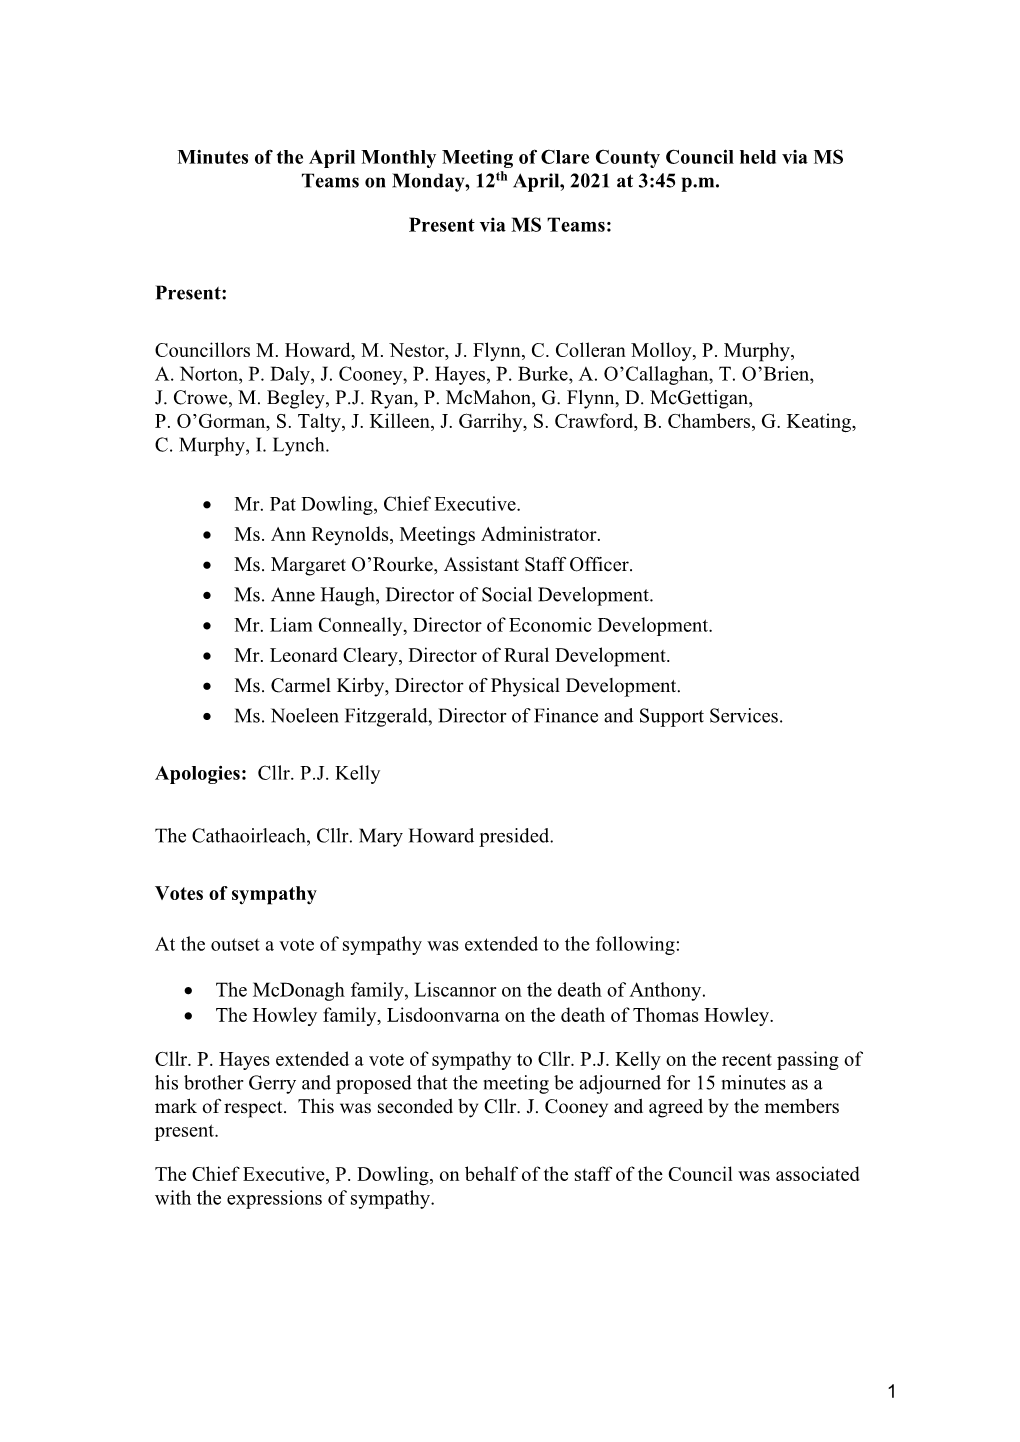 Minutes of April 2021 Meeting of Clare County Council